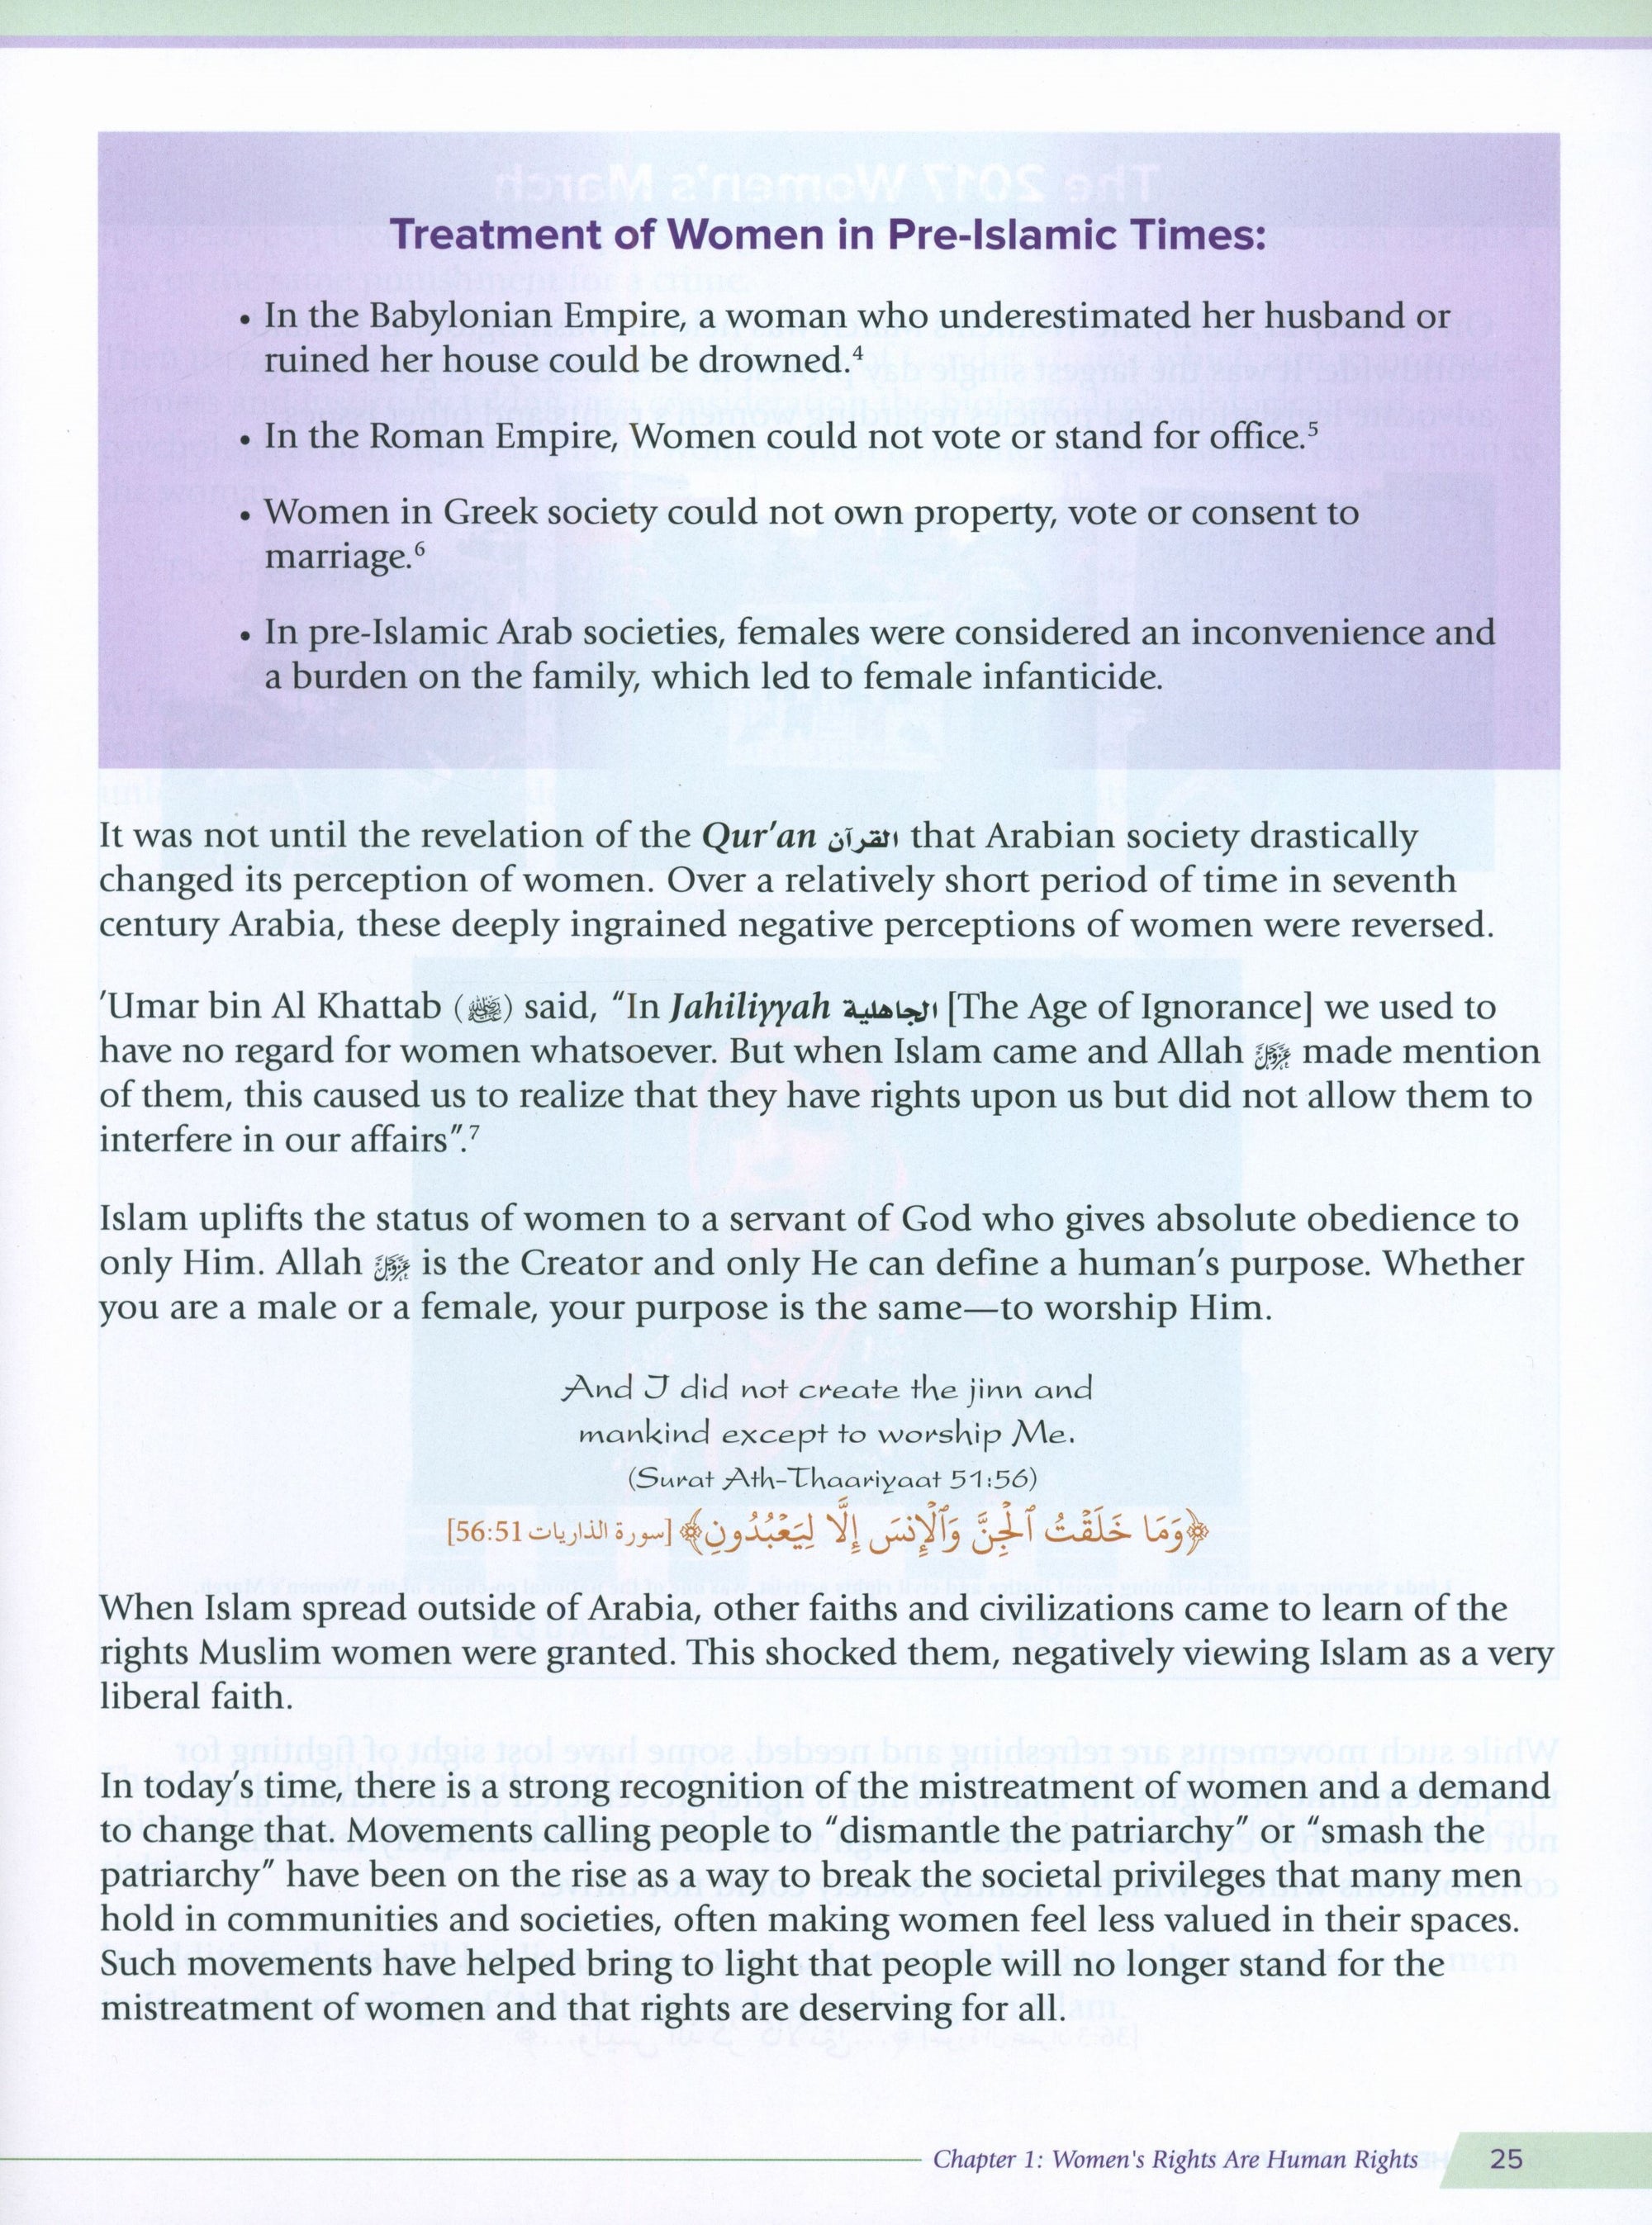 Health and Wellness (From an Islamic  Perspective) Leve 4